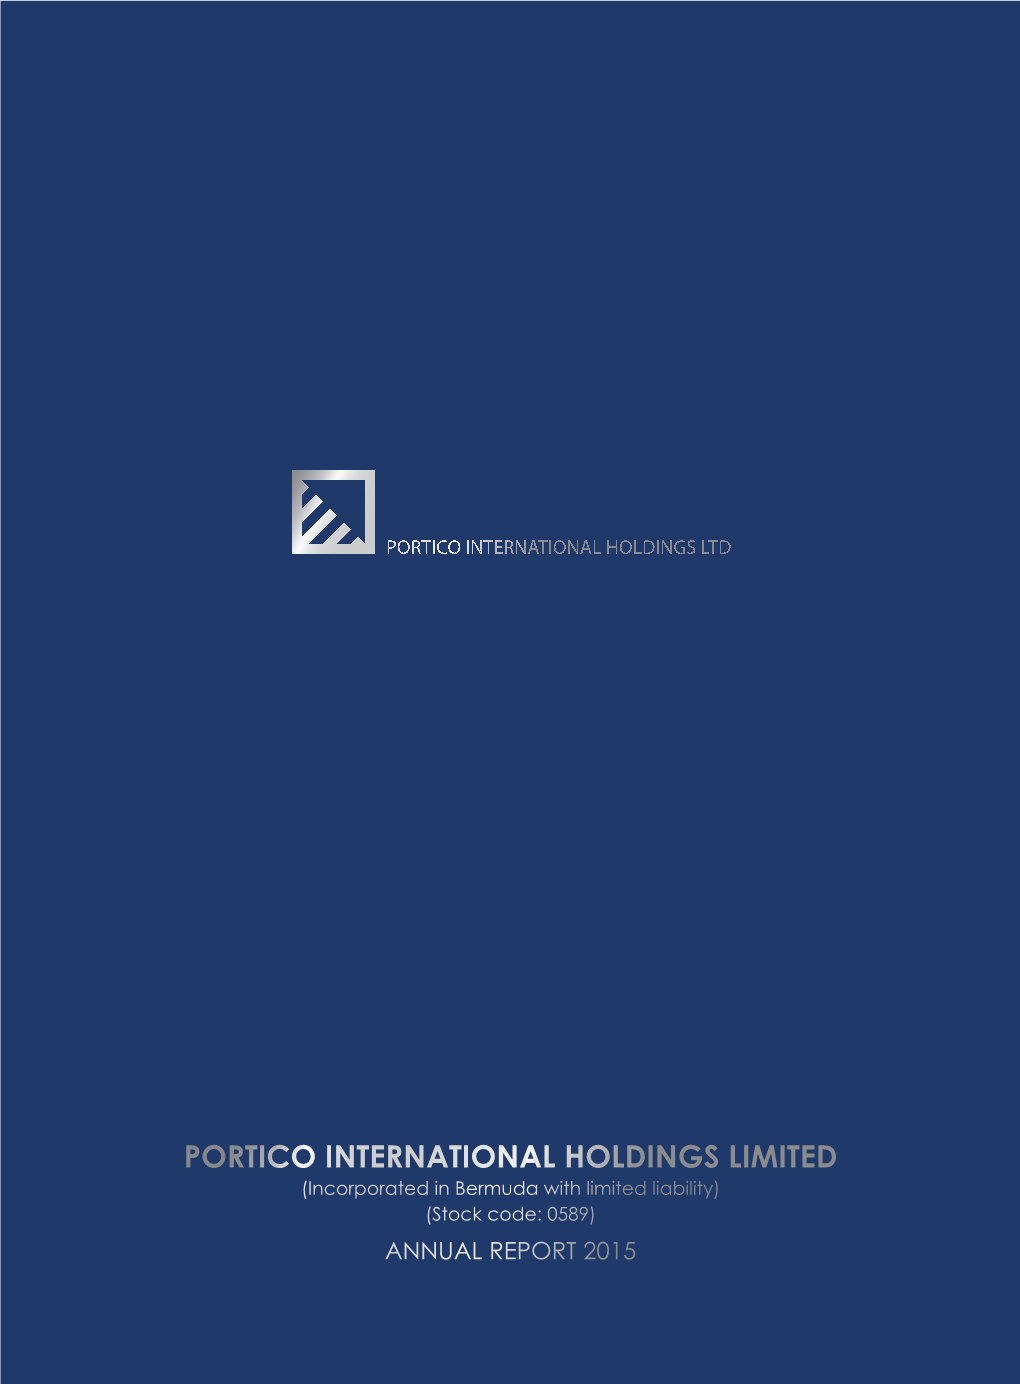 Portico International Holdings Limited